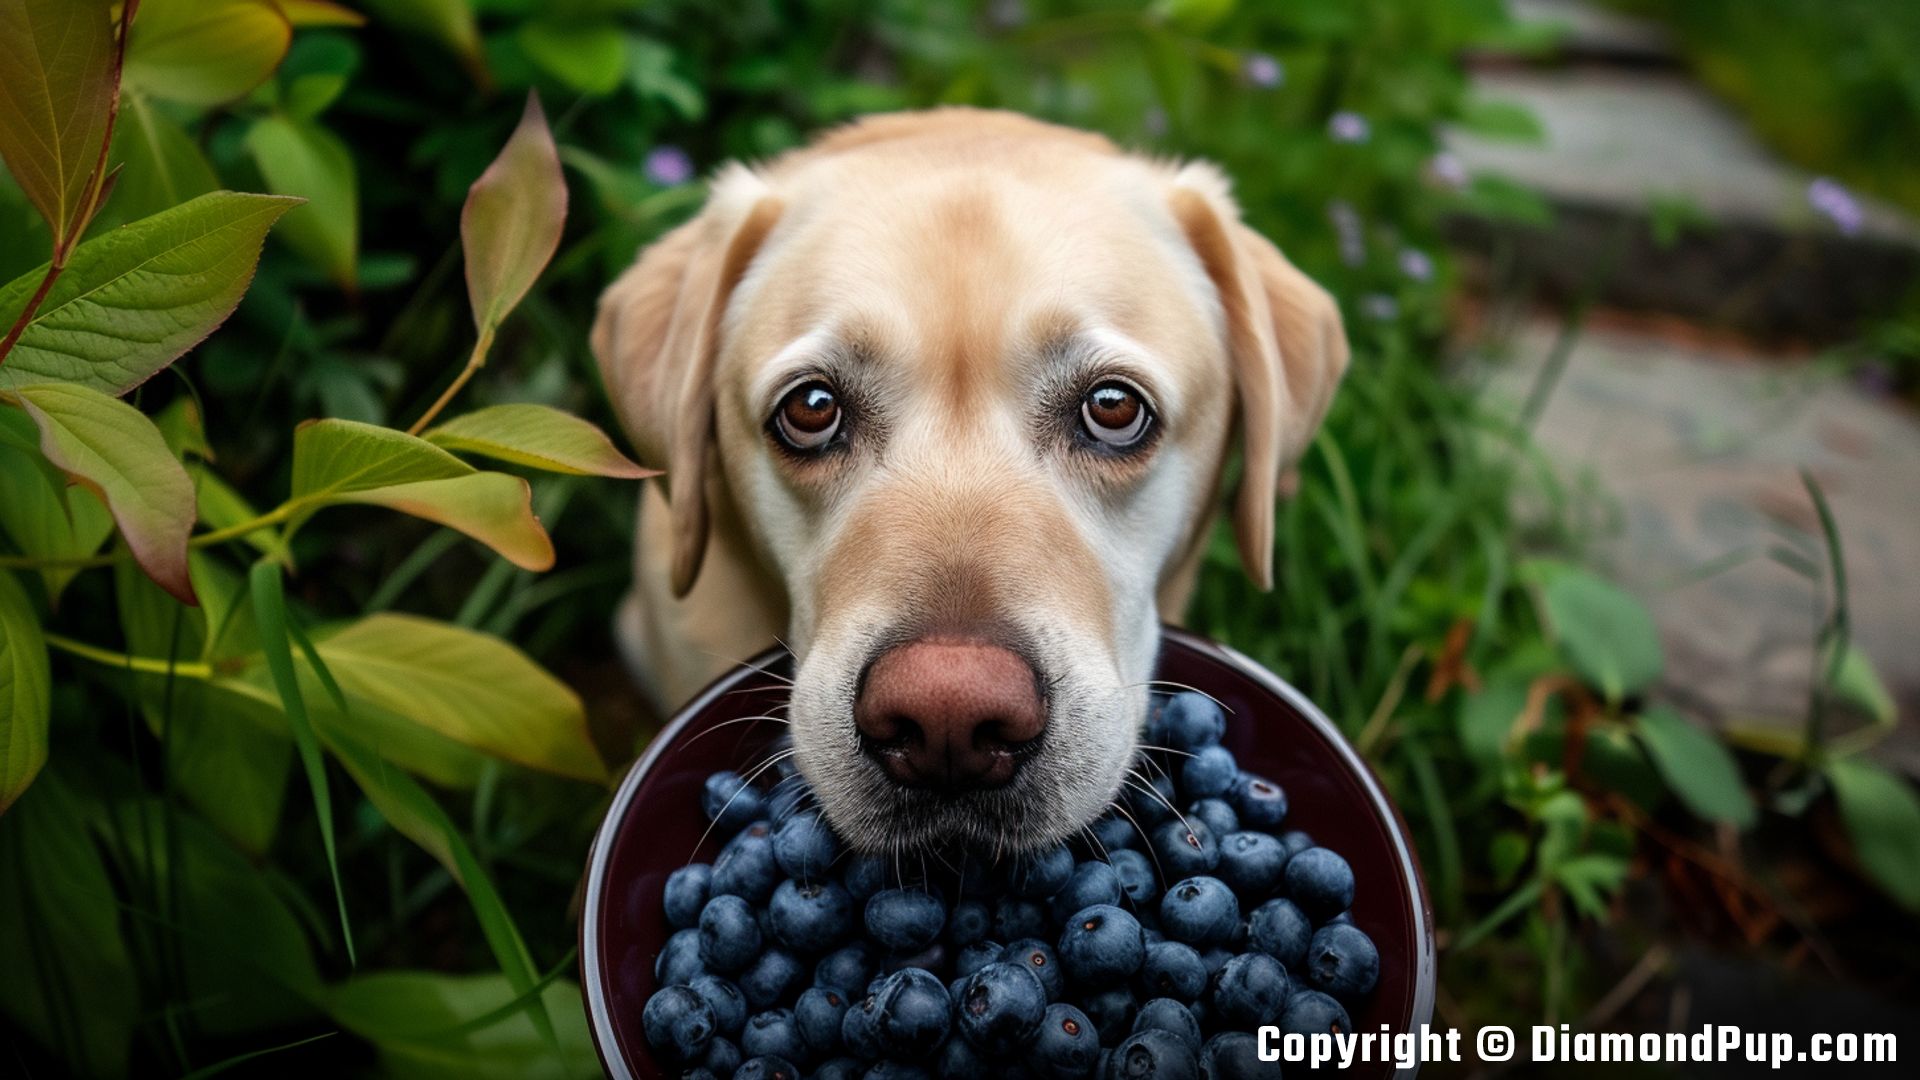 Image of an Adorable Labrador Snacking on Blueberries